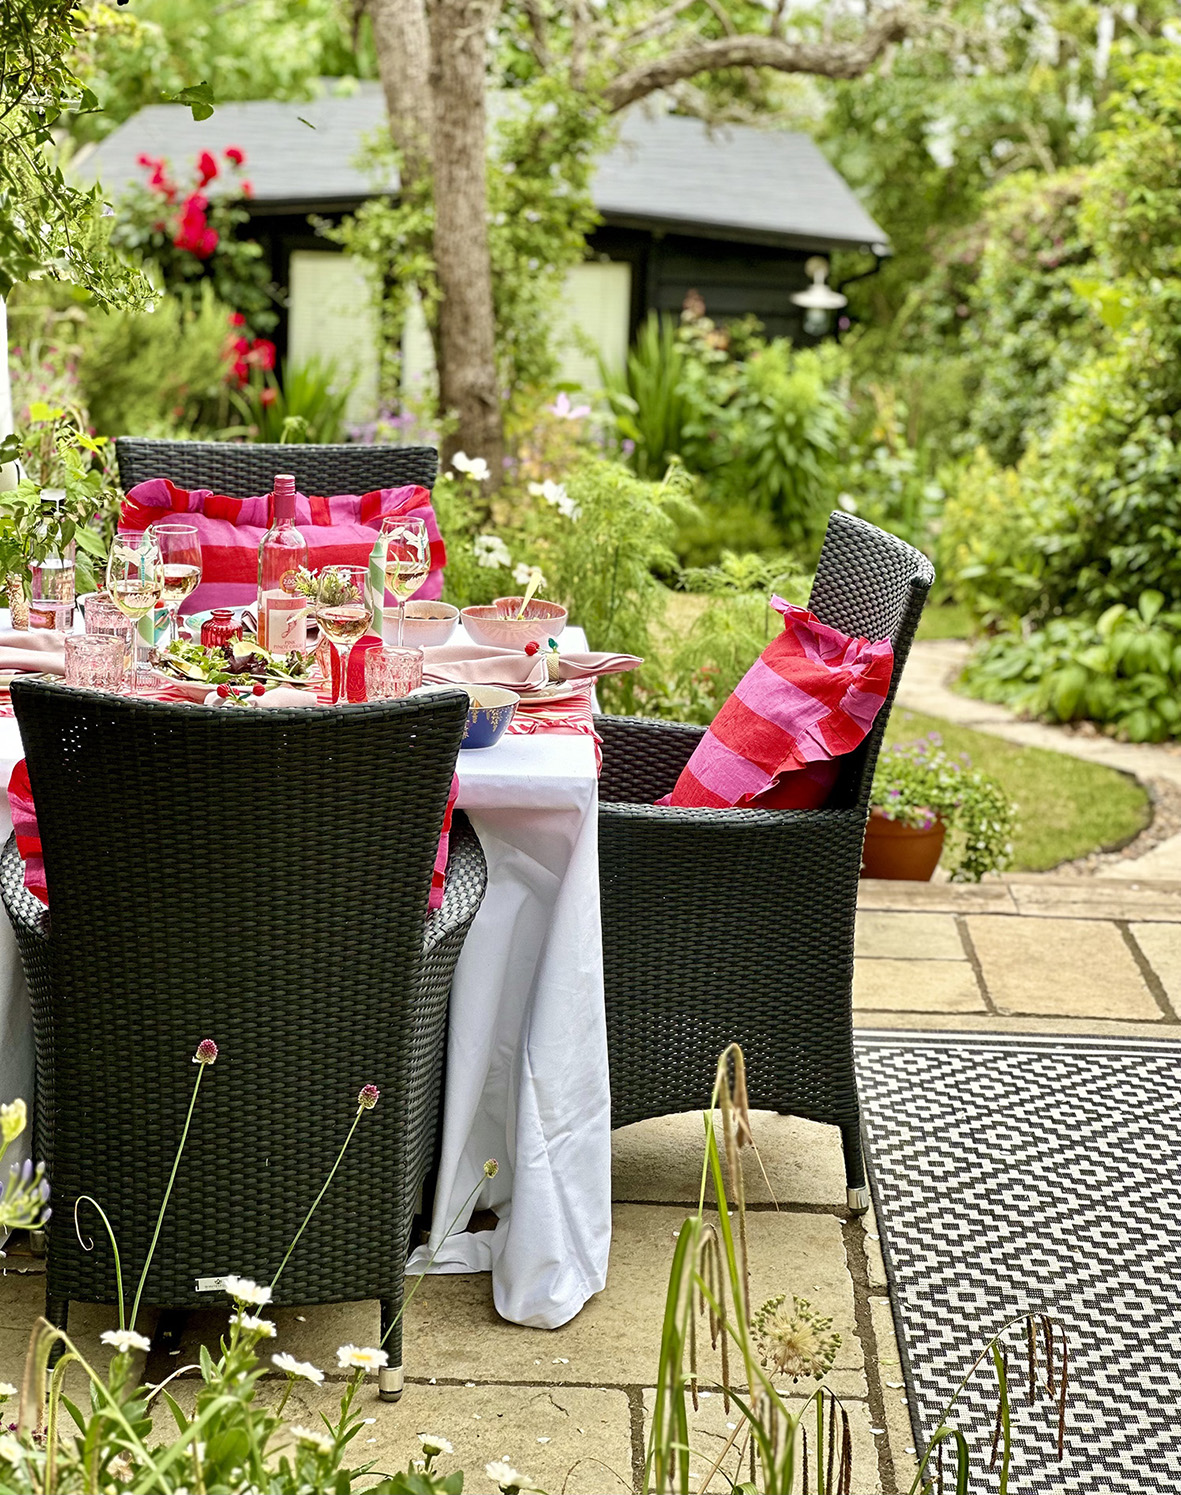 Style & Decor blogger Sarah's garden and table set for lunch